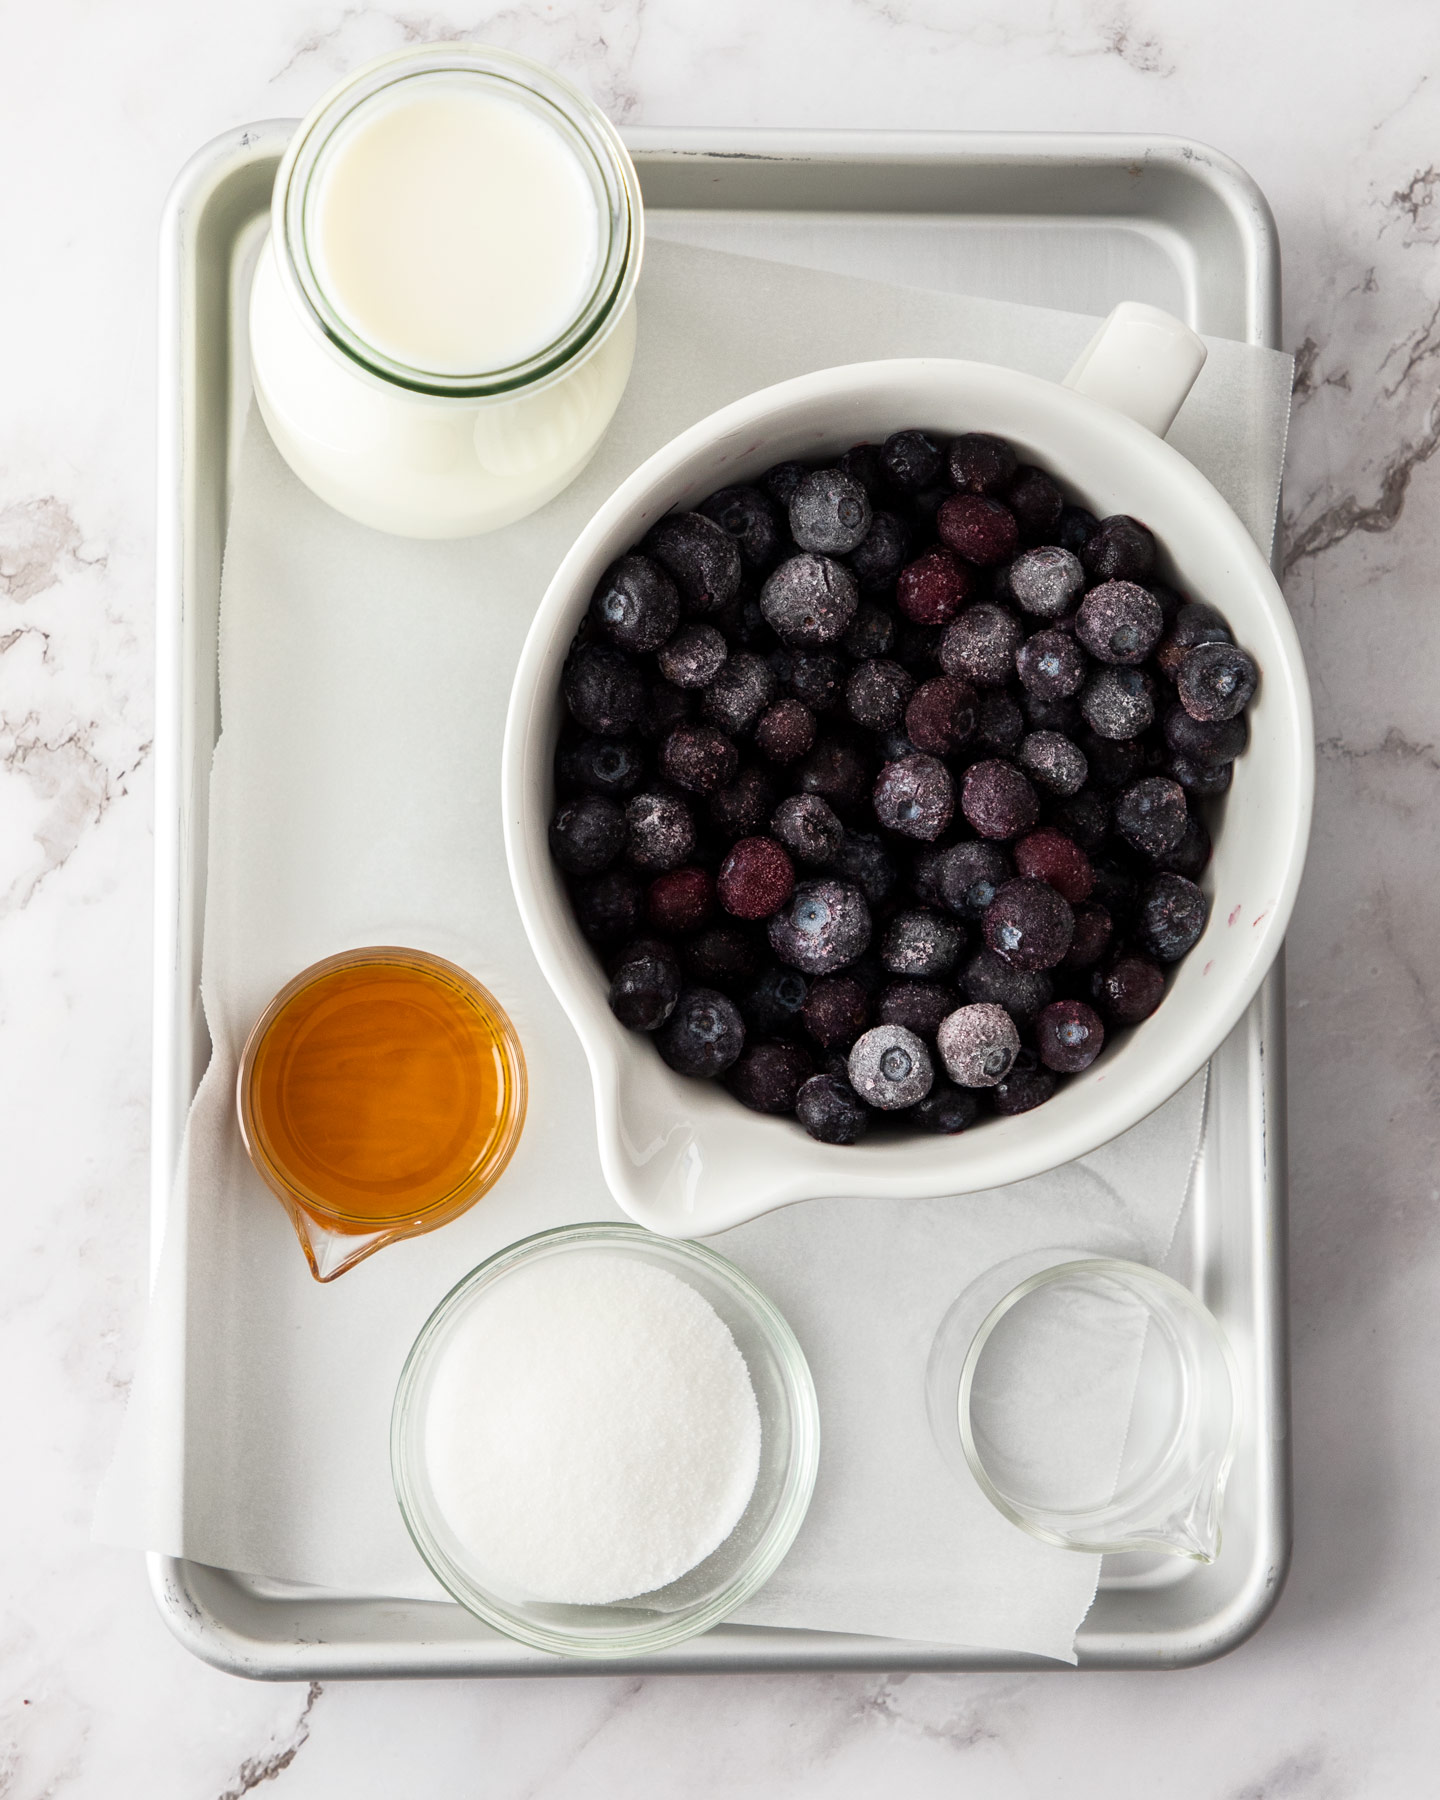 Ingredients for blueberry milk on a baking tray.